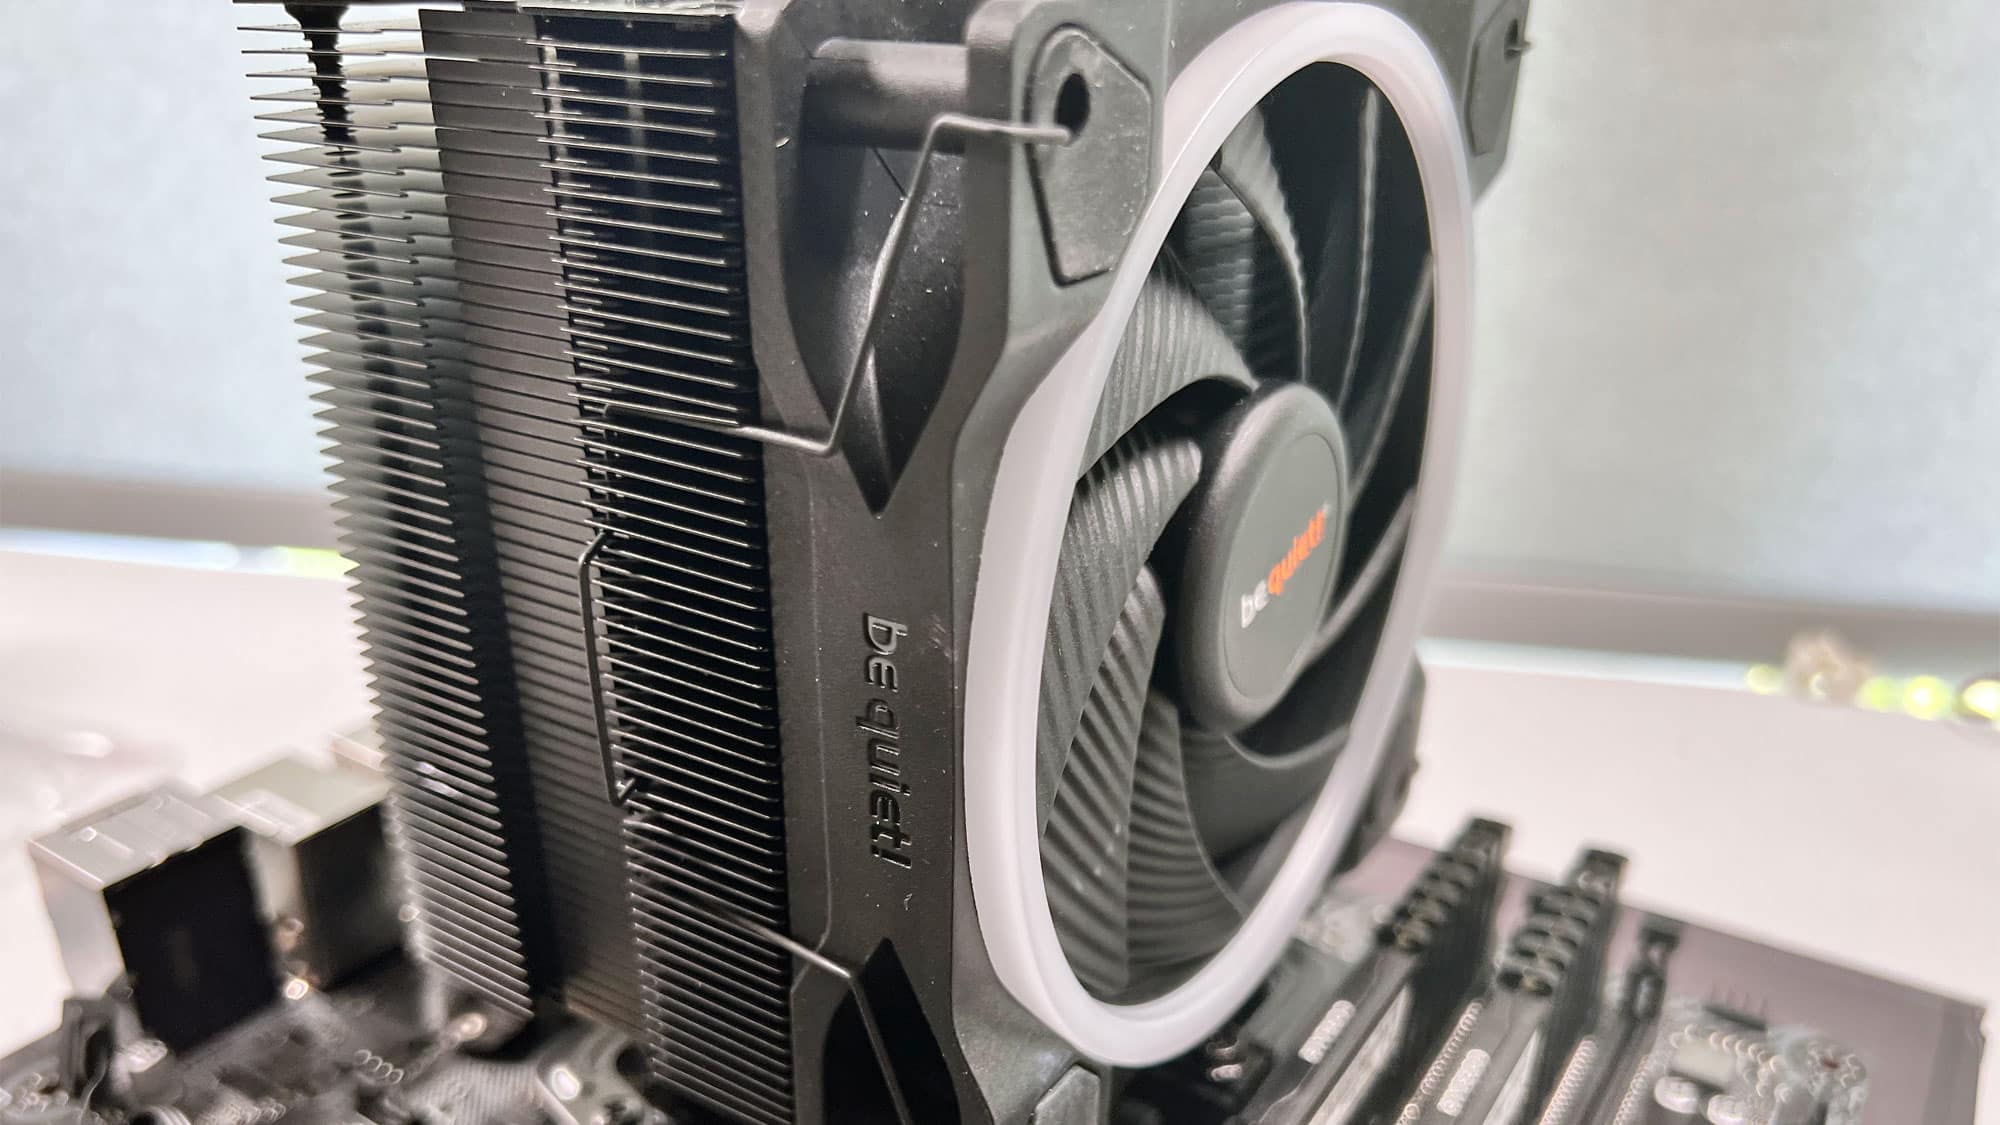 2x Cooling Performance?! - Be quiet! Pure Rock 2 FX Review 